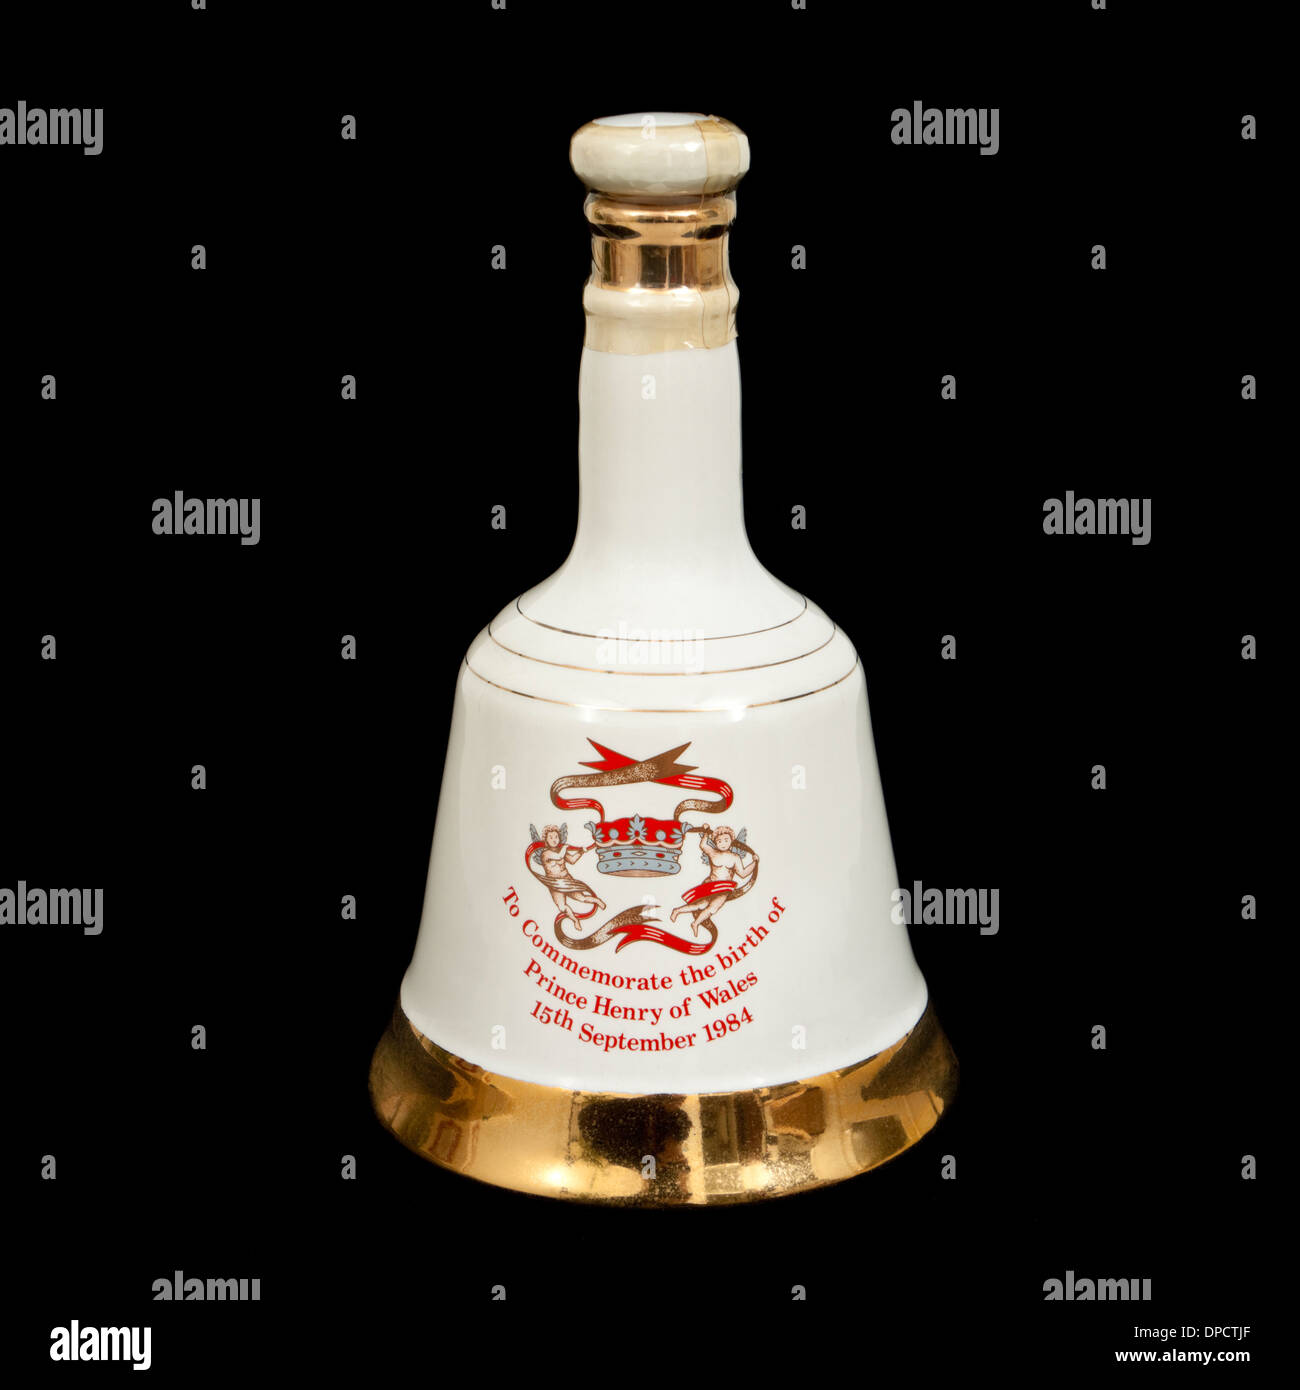 Bell's Scotch Whisky porcelain Royal Decanter made by Wade, commemorating the Birth of Prince Henry (Harry) on 15/9/1984 Stock Photo